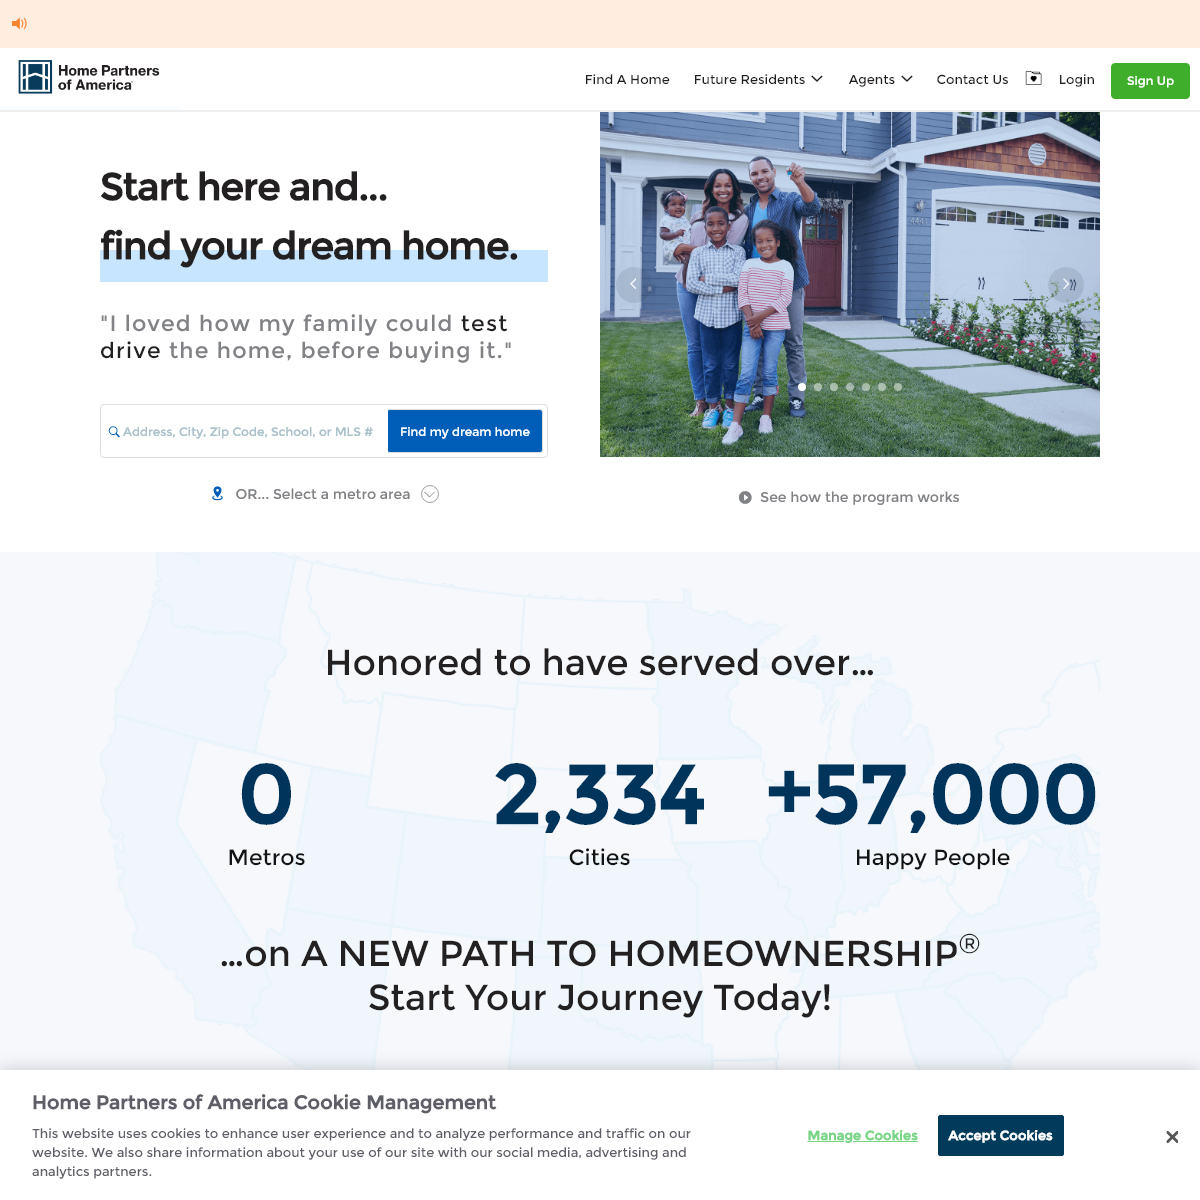 A complete backup of homepartners.com